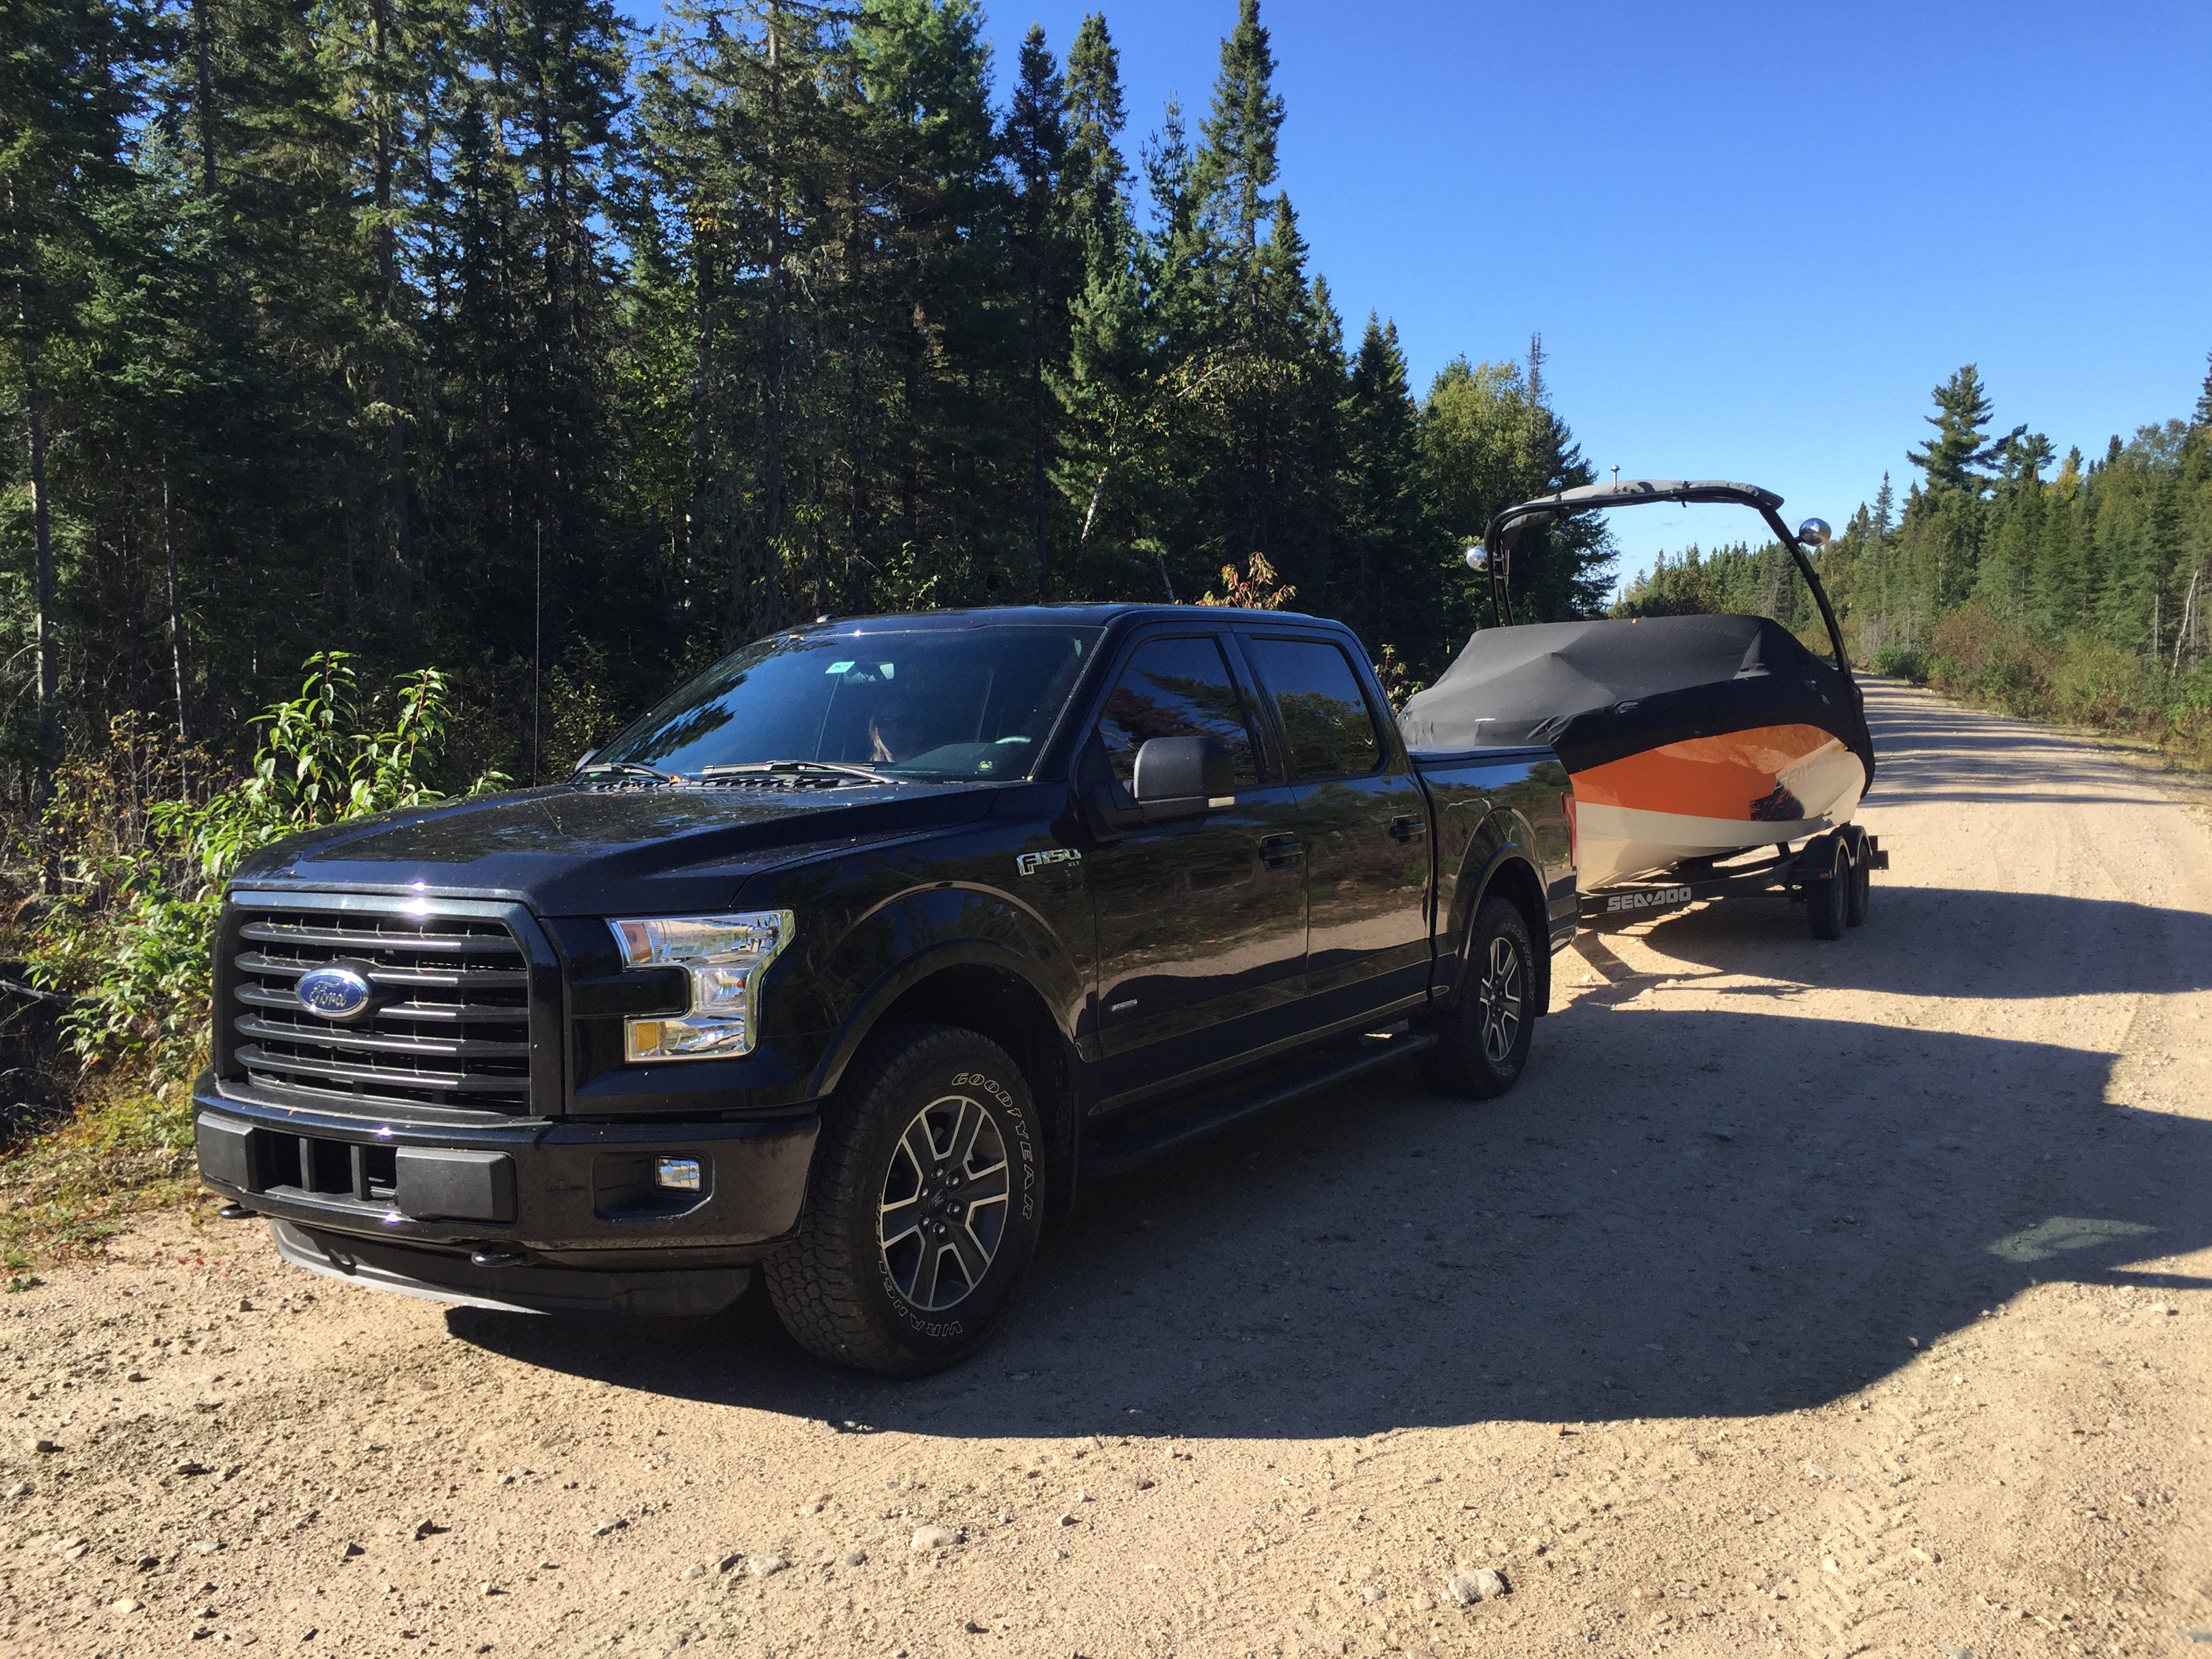 2015 Ford F 150 Xlt Ecoboost Towing Capacity 2015 Ford F 150 2.7 Towing Capacity